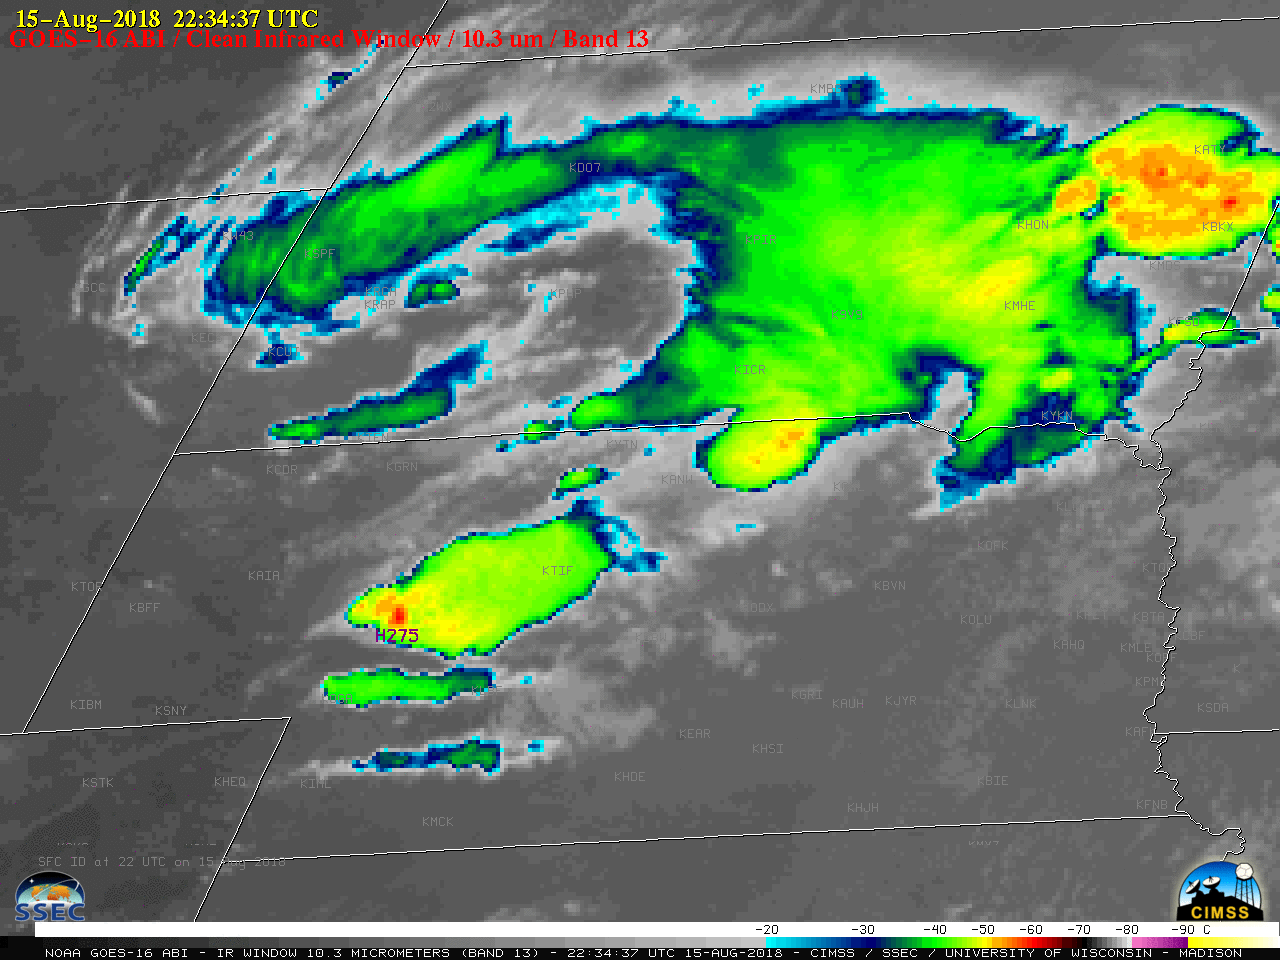 GOES-16 "Clean" Infrared Window (10.4 µm) images, with SPC storm reports plotted in purple [click to play MP4 animation]